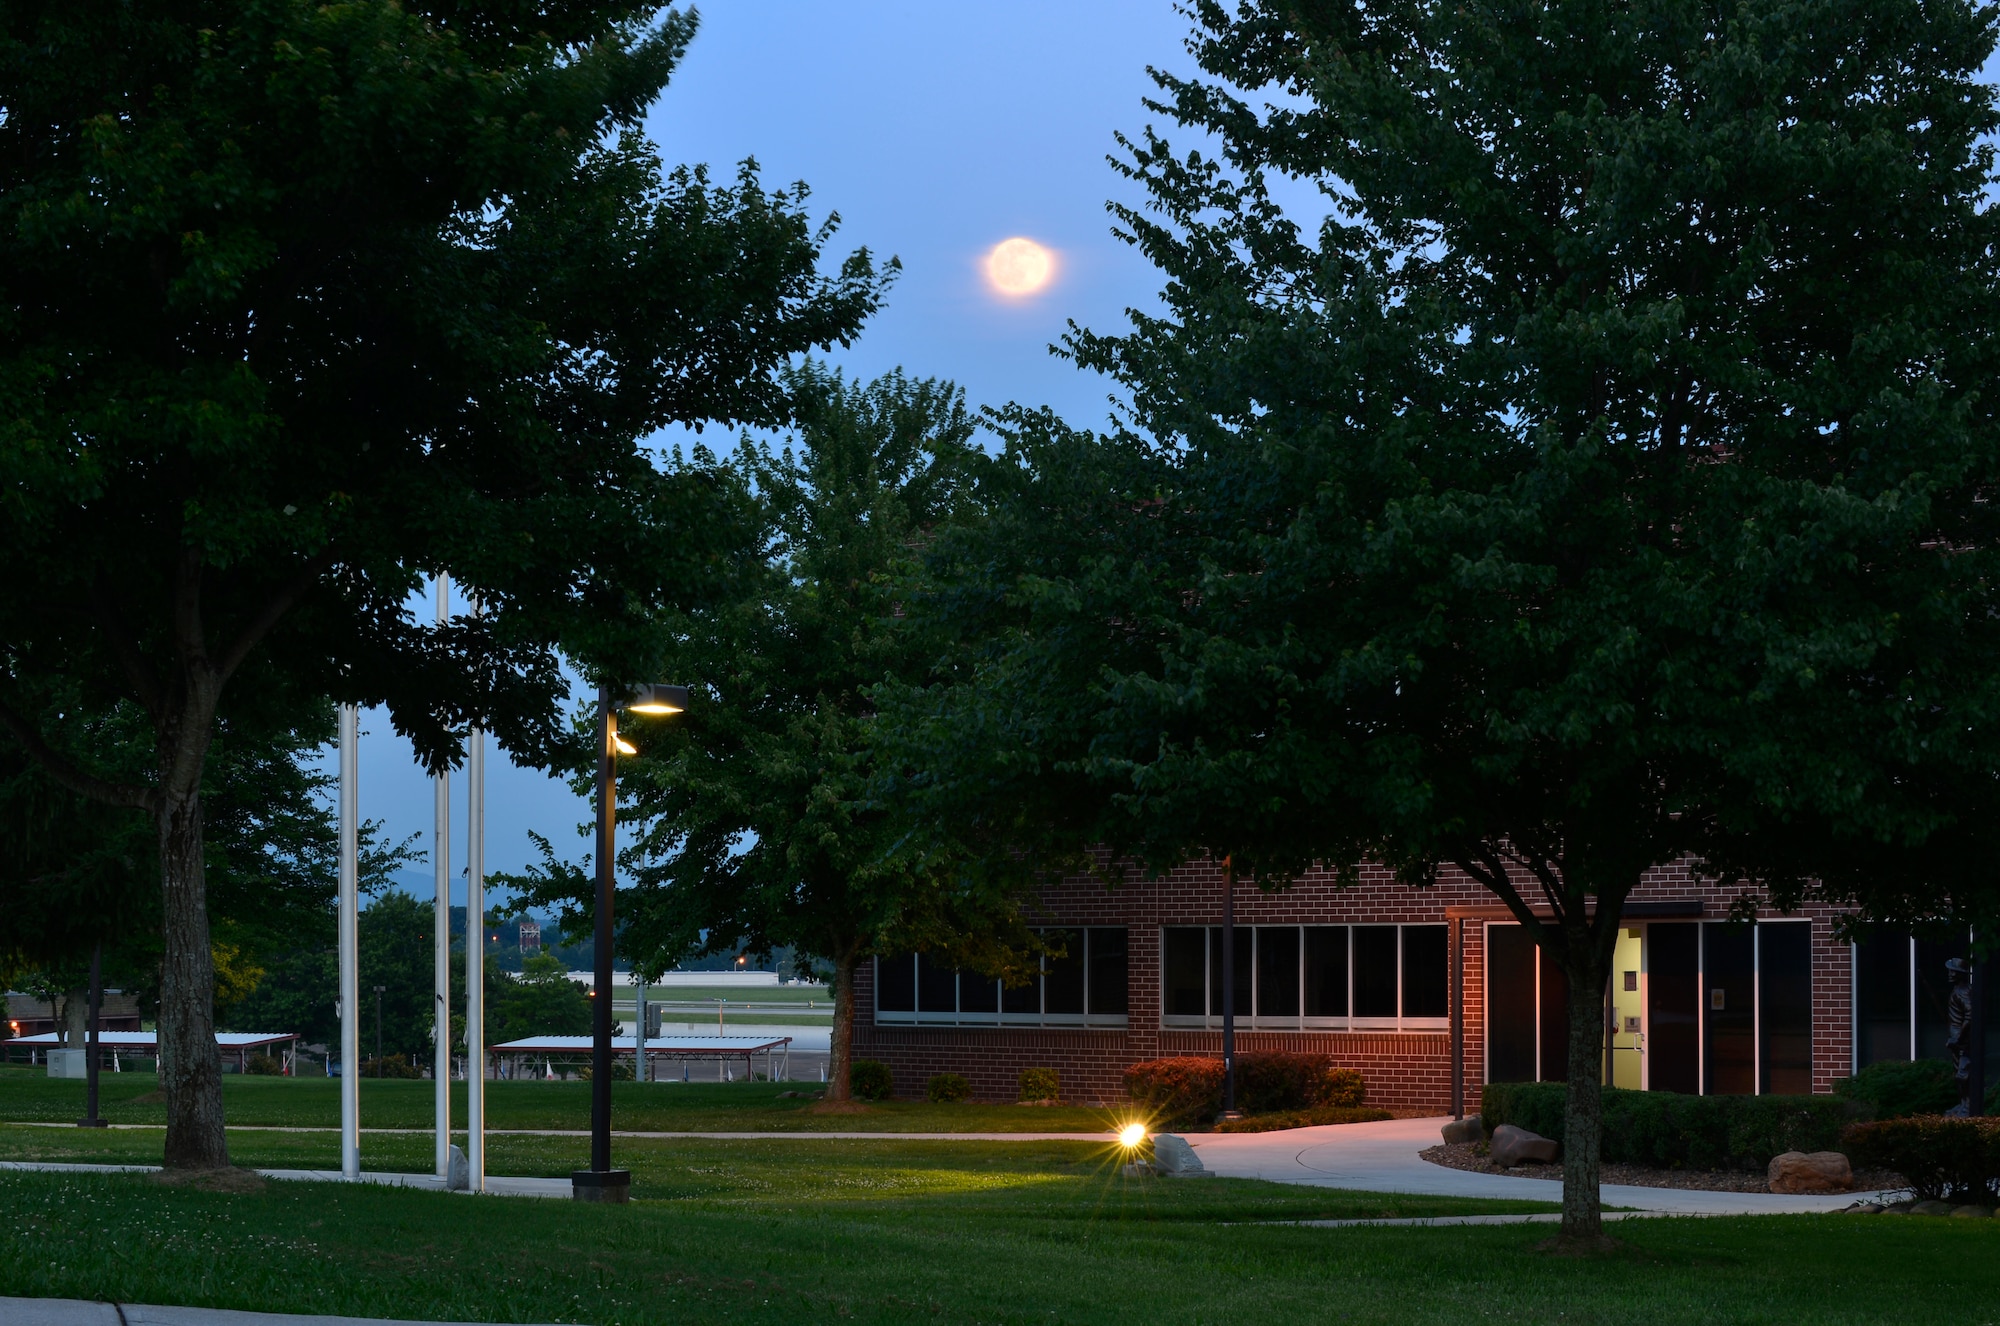 MCGHEE TYSON AIR NATIONAL GUARD BASE, Tenn. - The full moon rises above the tree tops on a still night at the I.G. Brown Training and Education Center's campus, June 22, 2013, outside the Smoky Mountains. Since 1968, men and women have brought the campus to life. (U.S. Air National Guard photo by Master Sgt. Kurt Skoglund/Released)